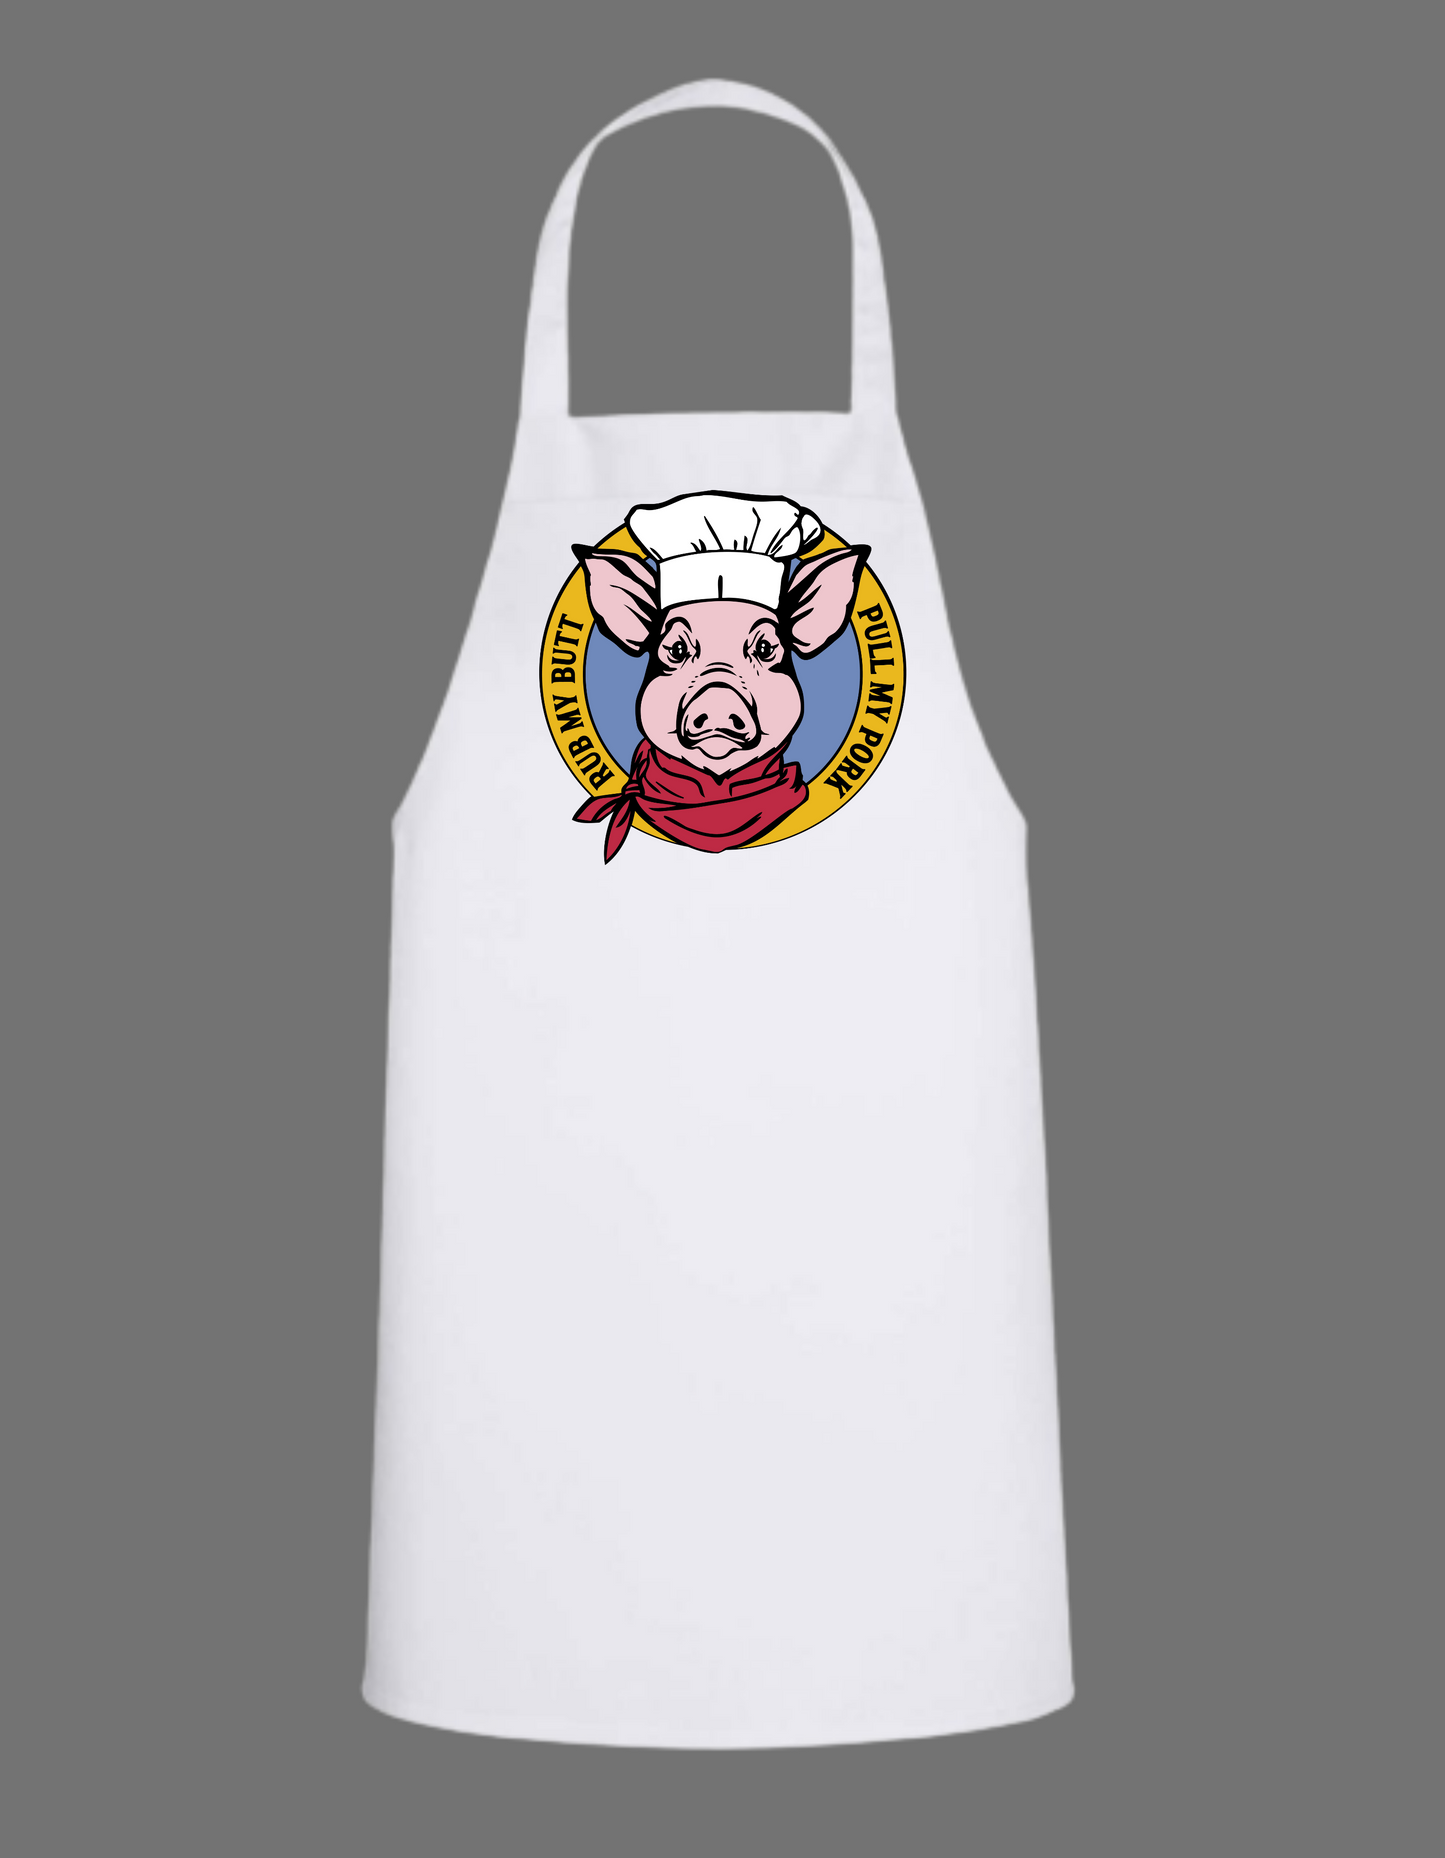 Dirty Pig - I Like My Butt Rubbed, My Pork Pulled - White Apron with Color design Great Gift - Mister Snarky's